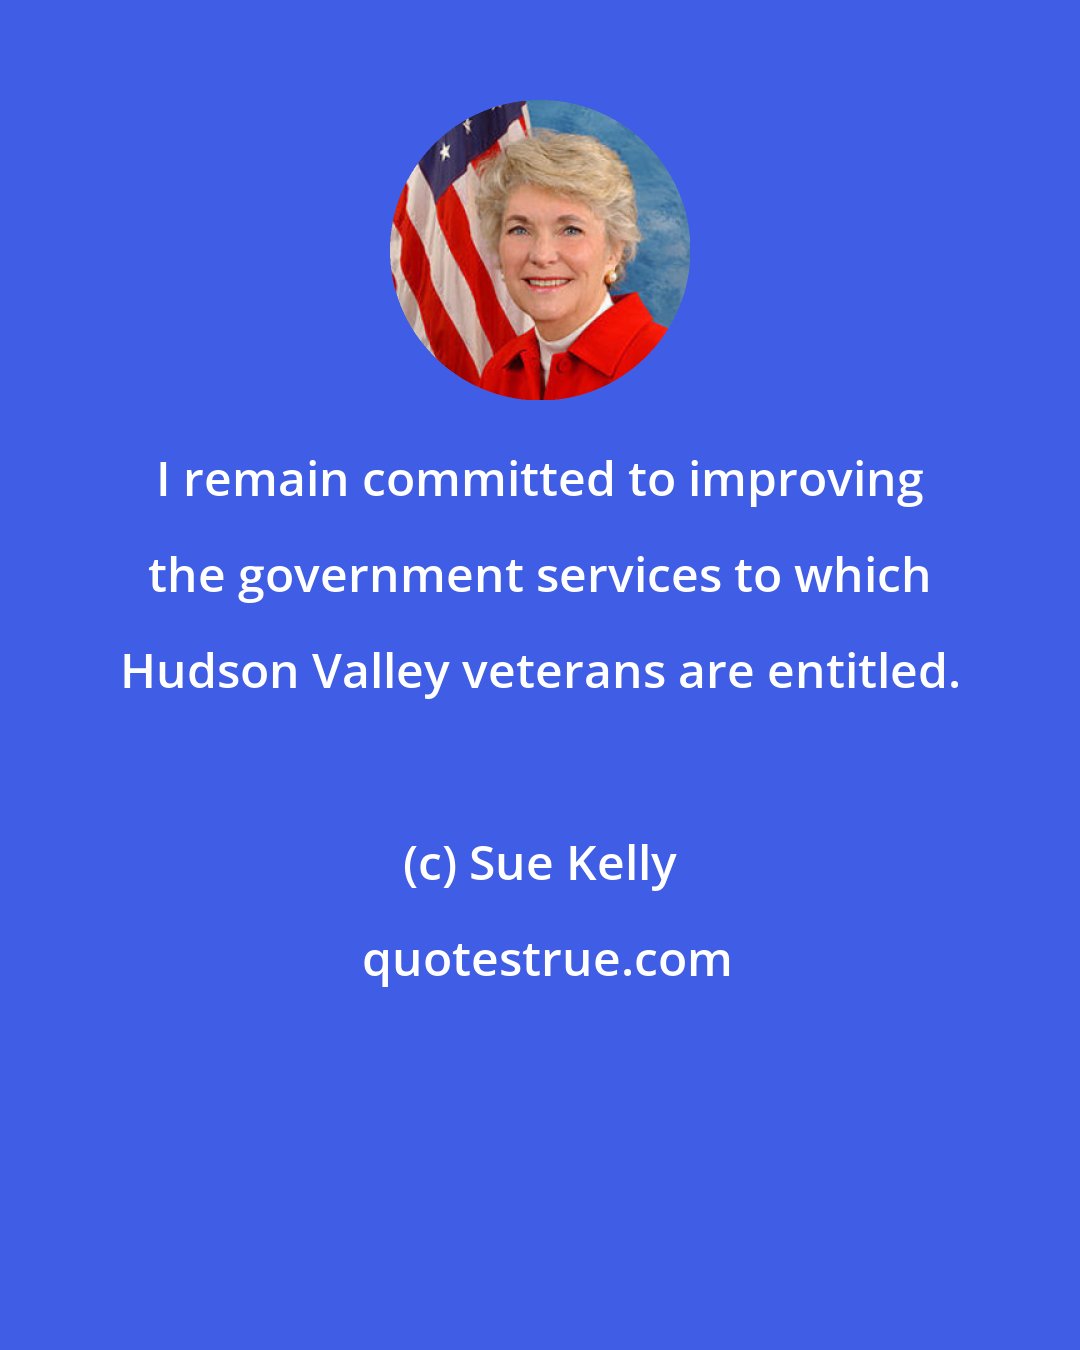 Sue Kelly: I remain committed to improving the government services to which Hudson Valley veterans are entitled.